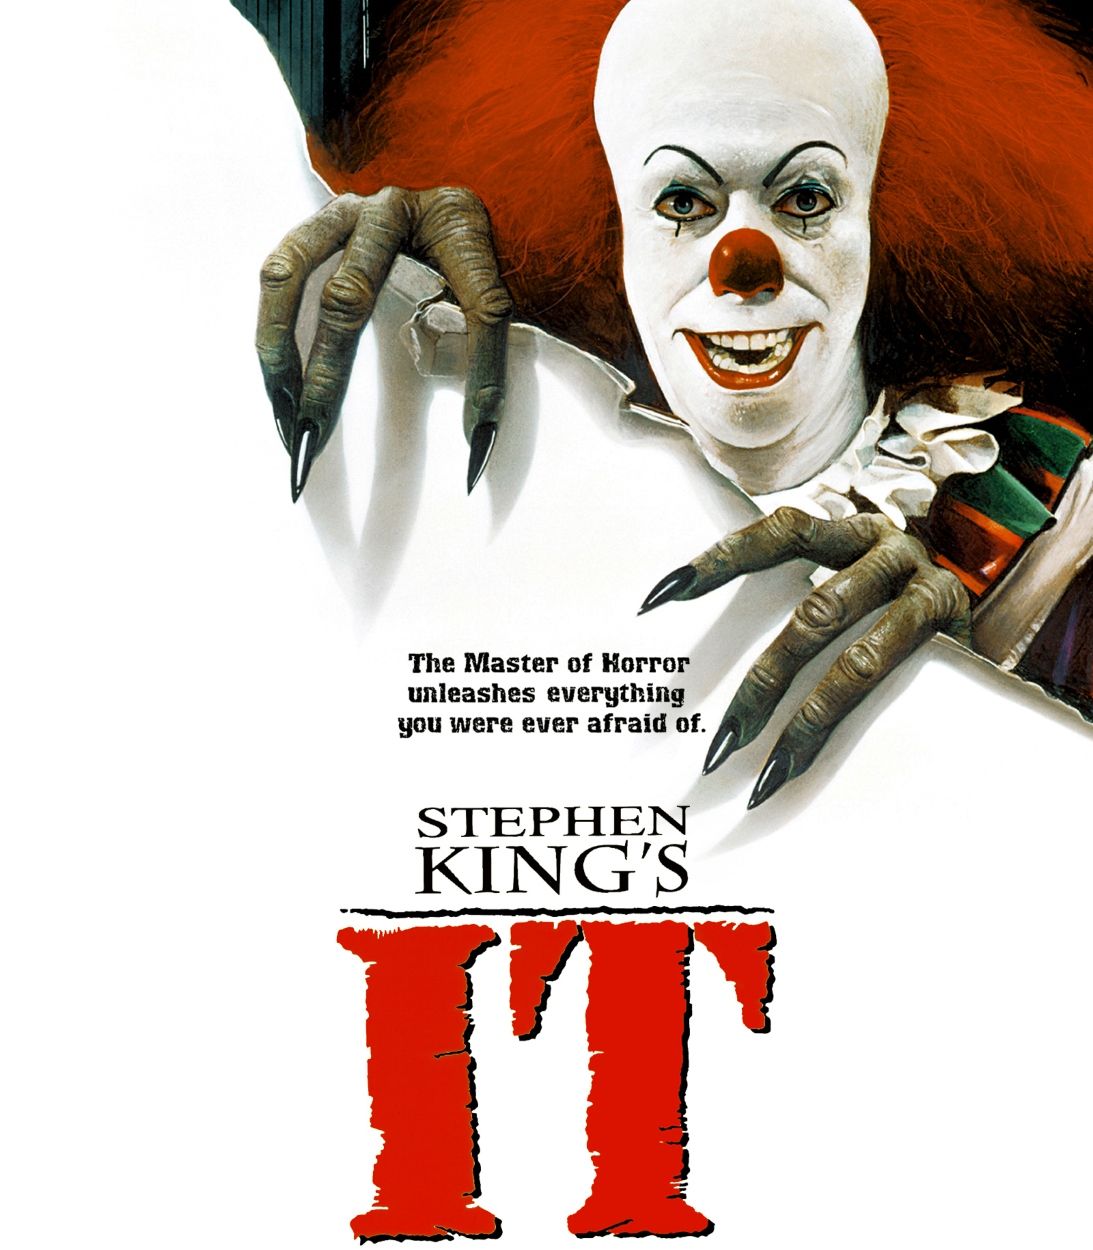 IT 1990 miniseries pennywise 2017 TLDR vertical